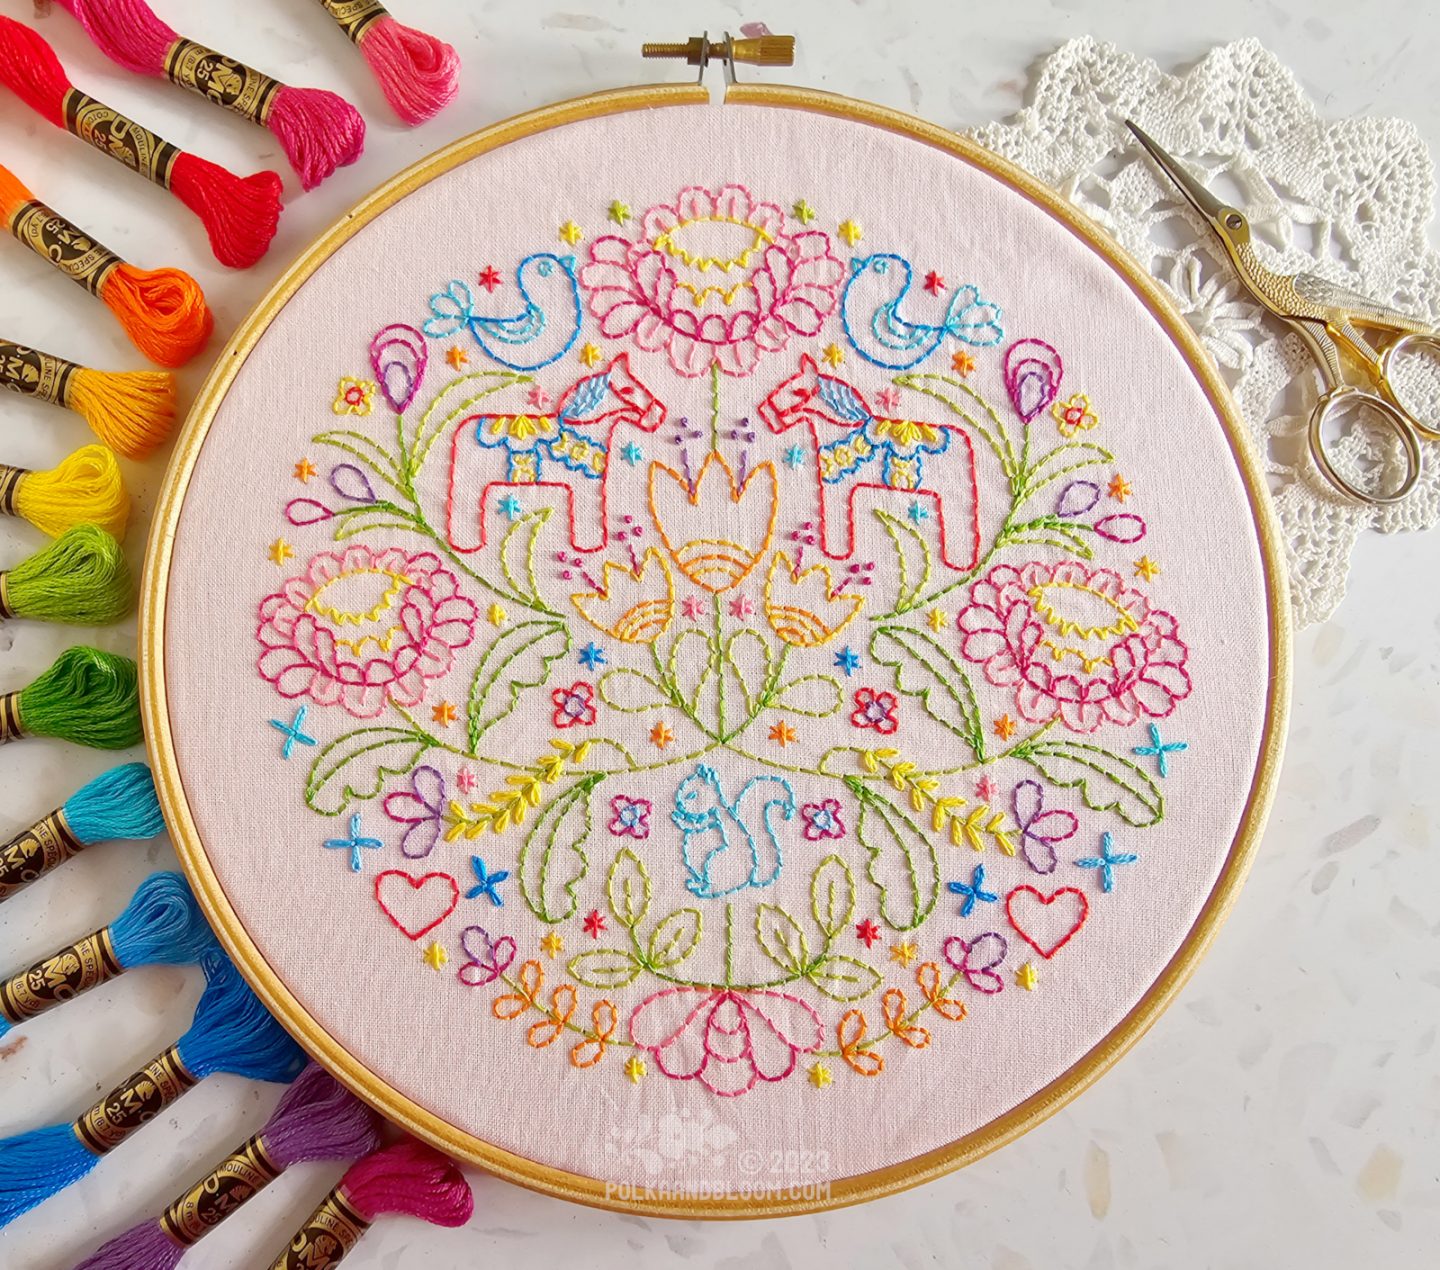 Overhead view of a round wooden embroidery hoop. In the hoop is light pink fabric stitched with a Scandi inspired design in many colours with Dala horse, flowers and leaf motifs.